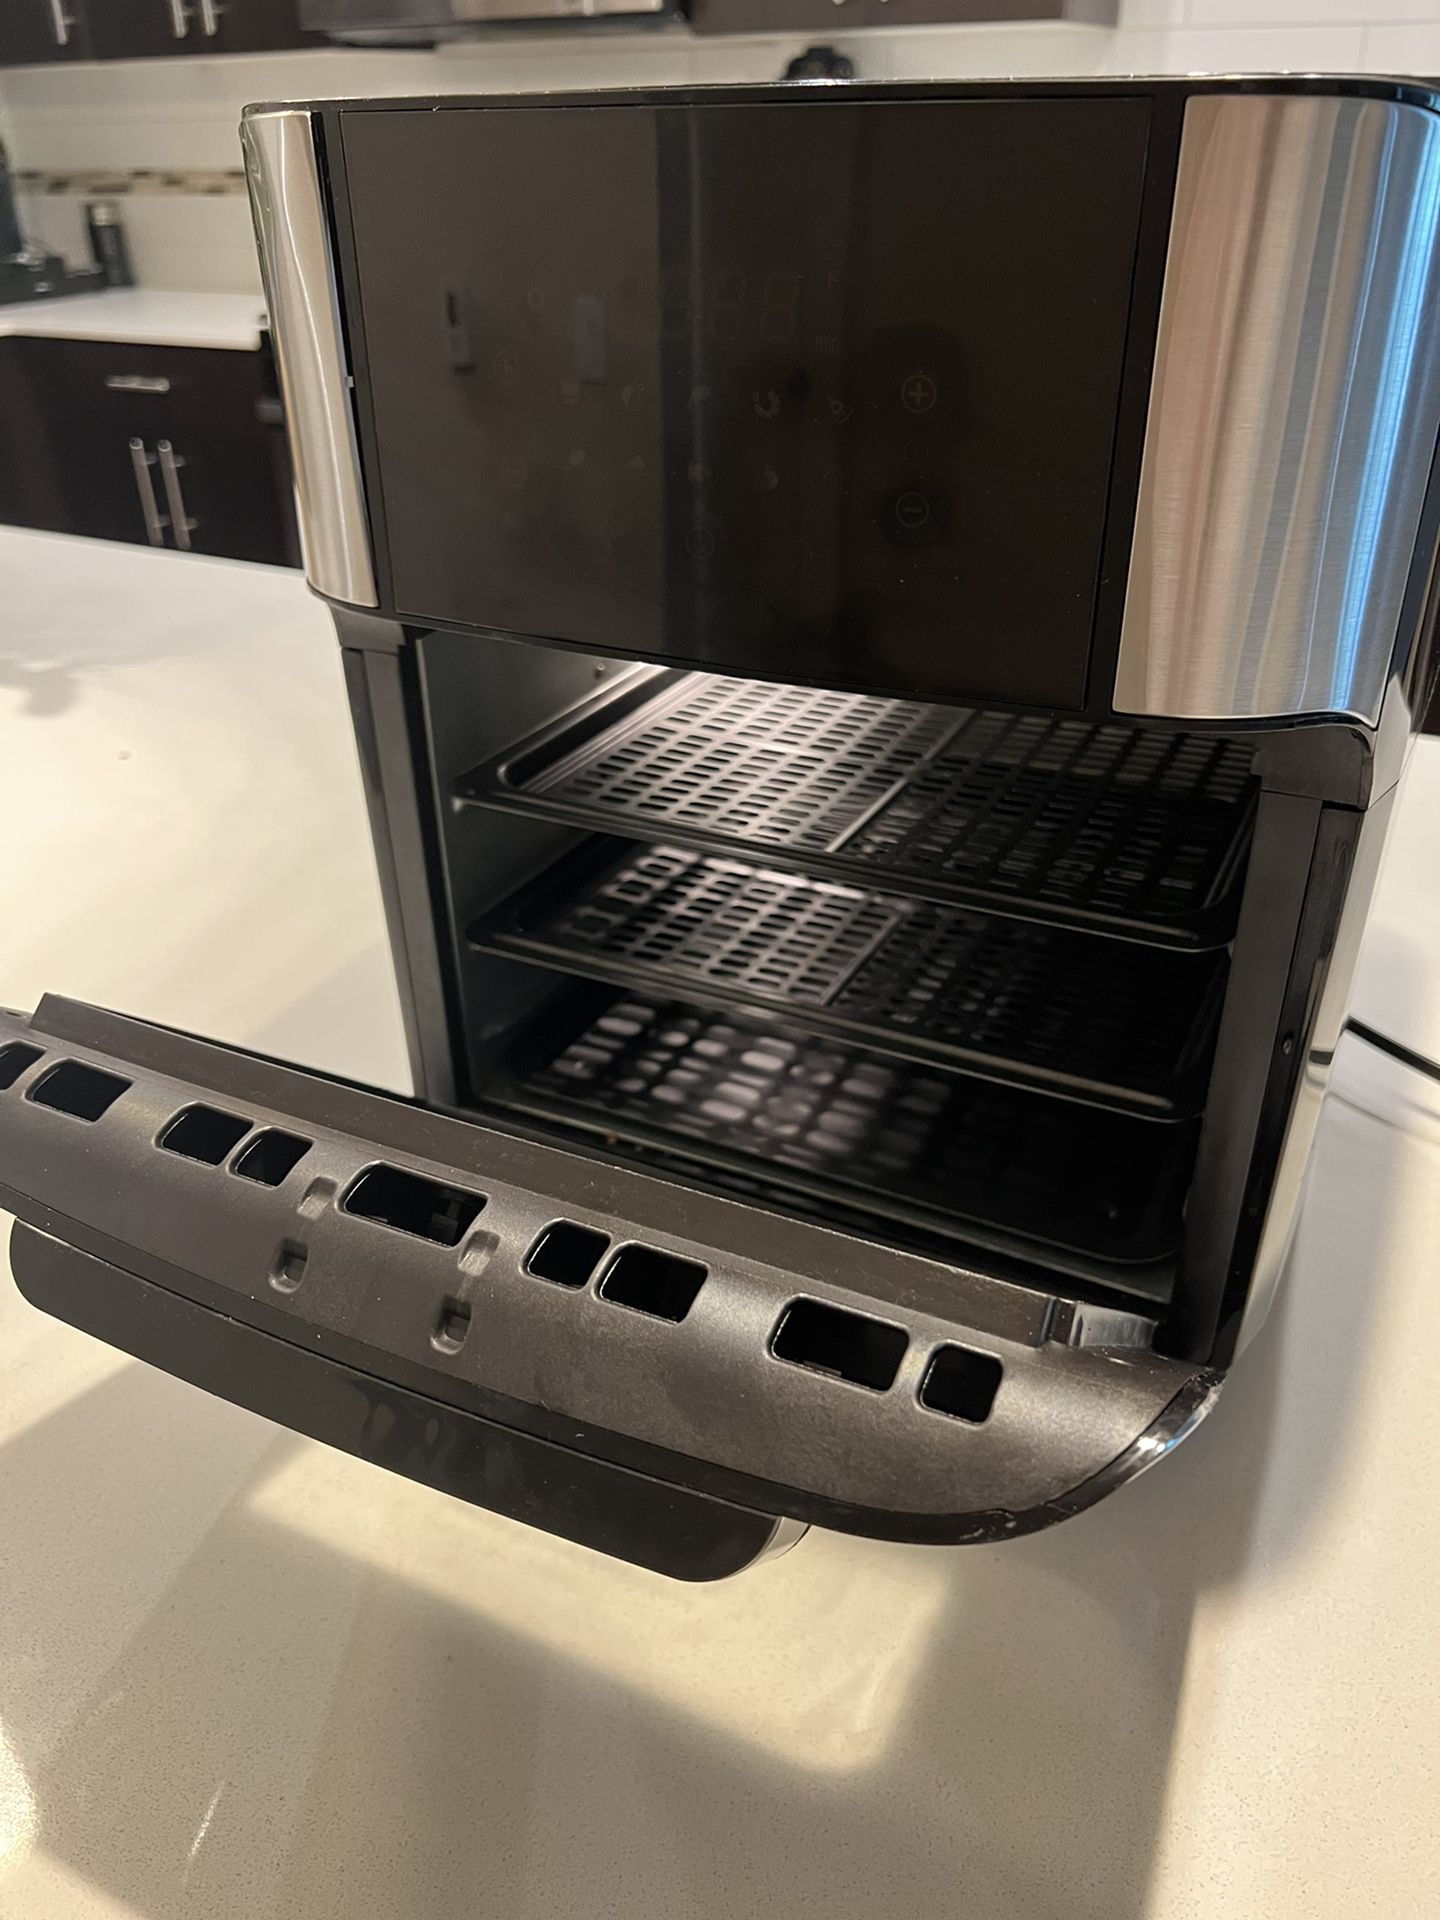 Emeril French Door Air fryer 360 for Sale in Tacoma, WA - OfferUp